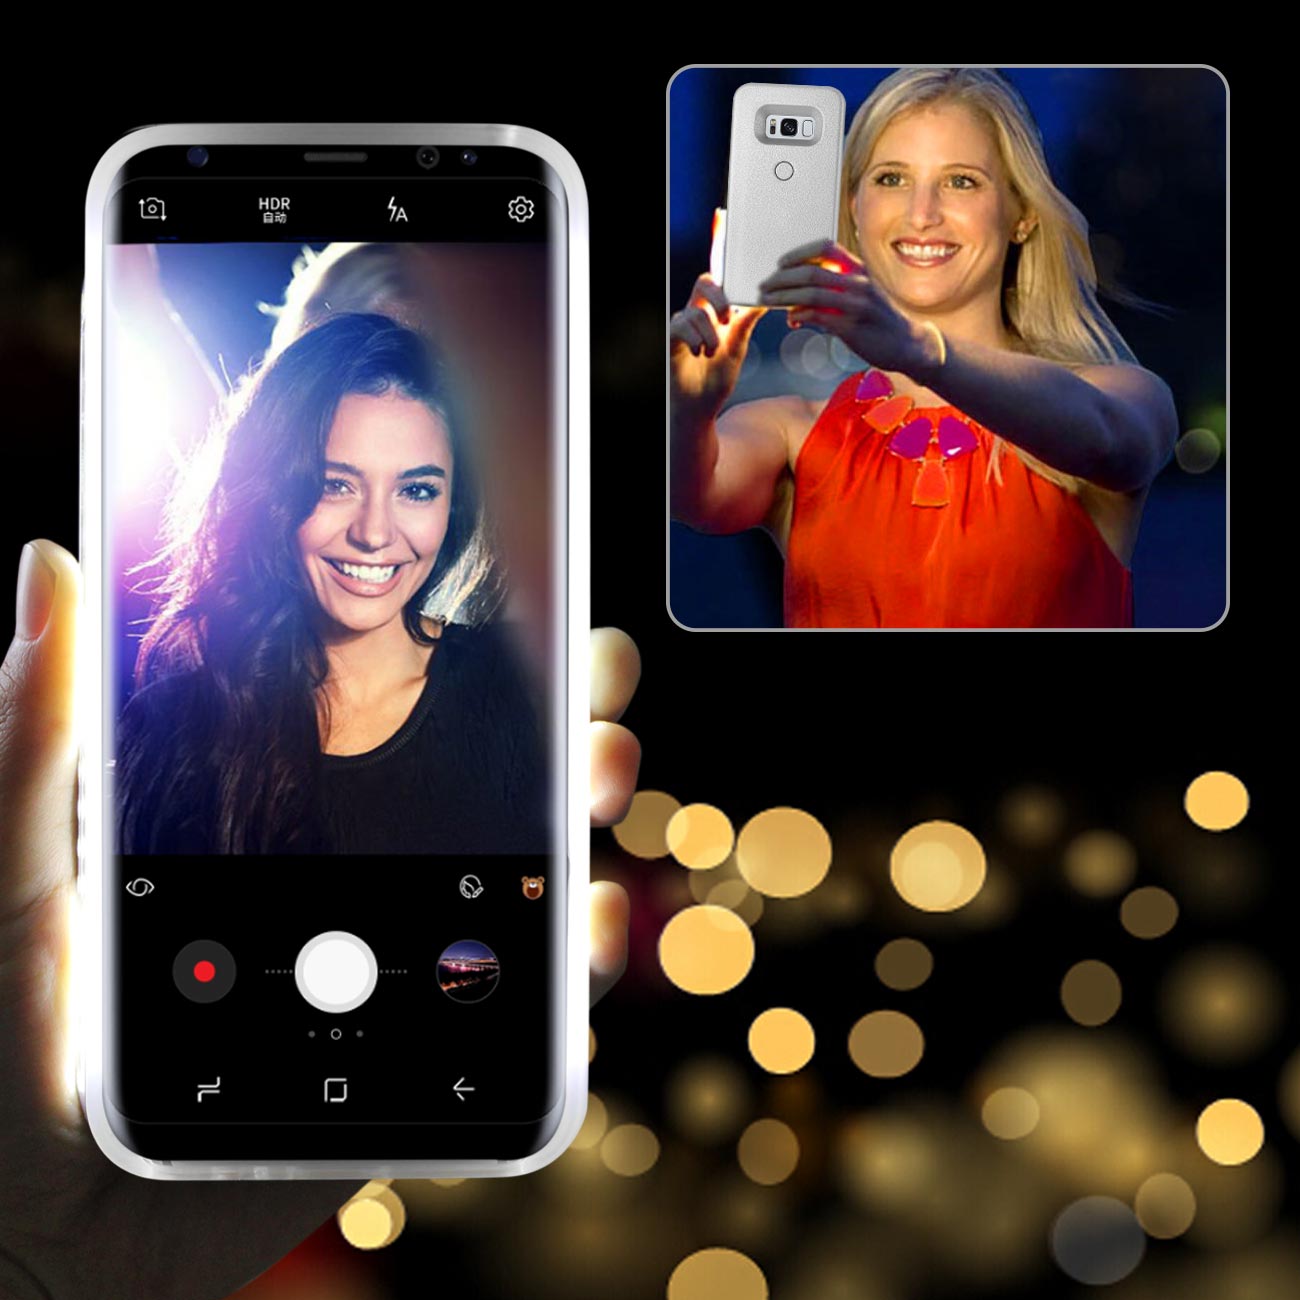 SAMSUNG GALAXY S8 LED SELFIE LIGHT UP ILLUMINATED CASE IN SILVER